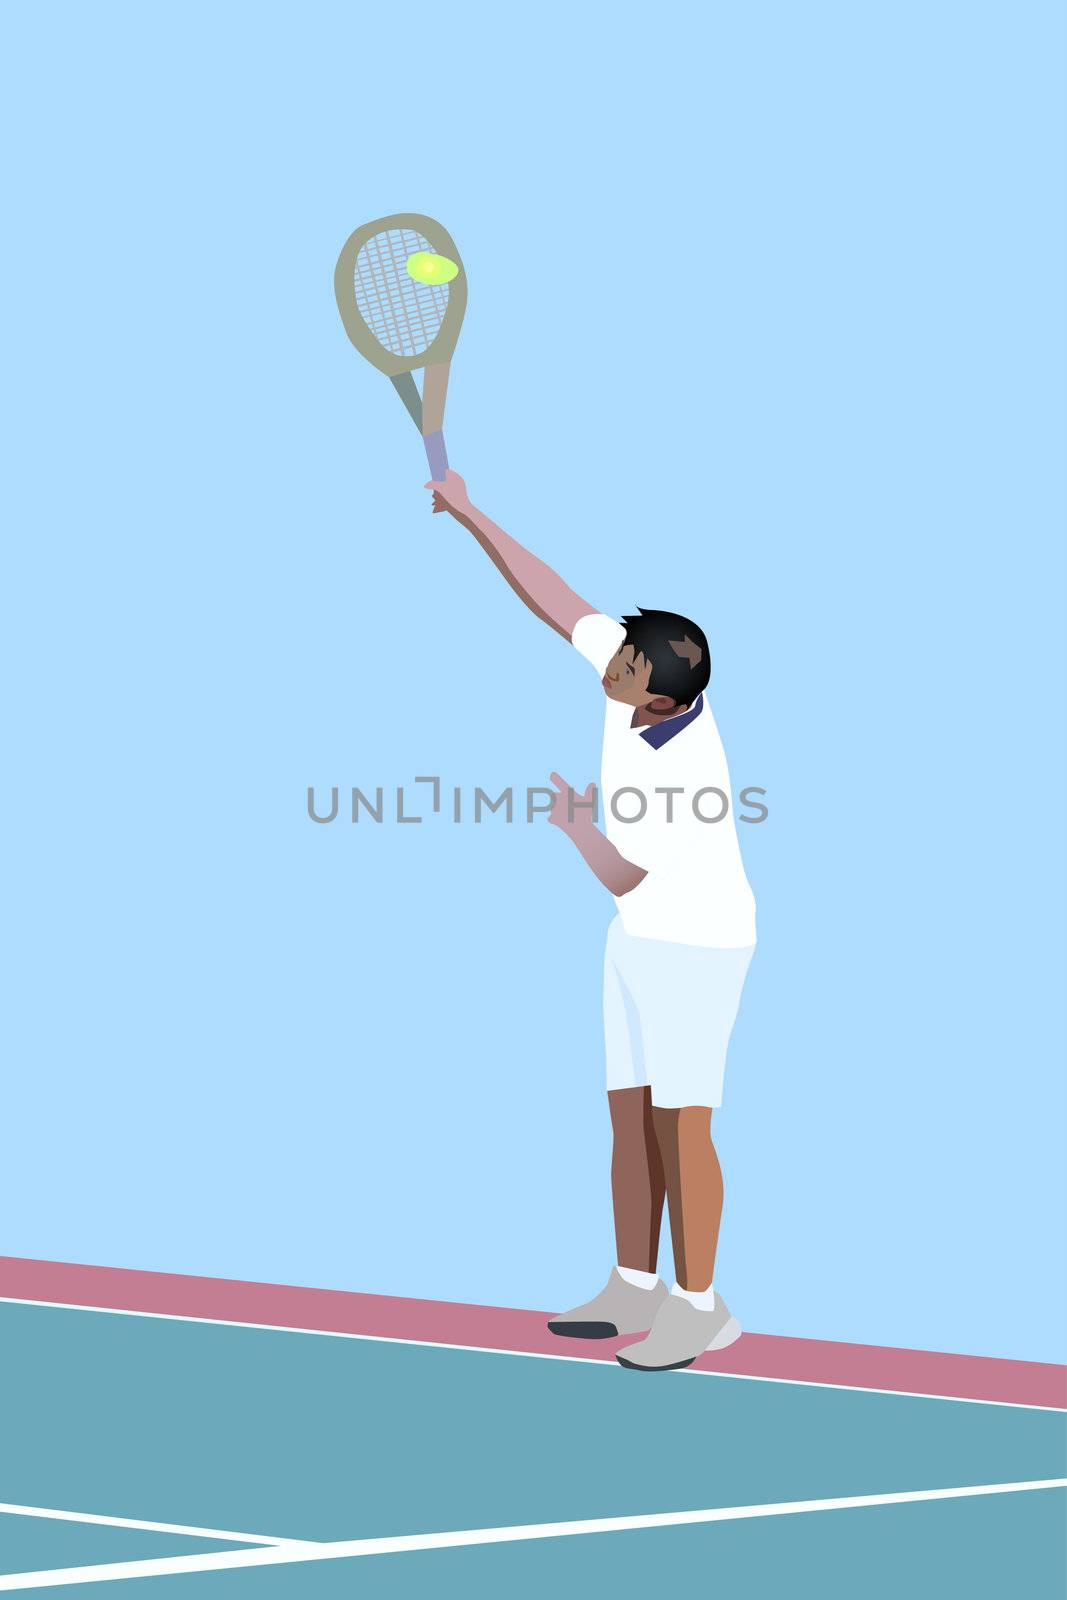 Illustration of a male tennis player serving